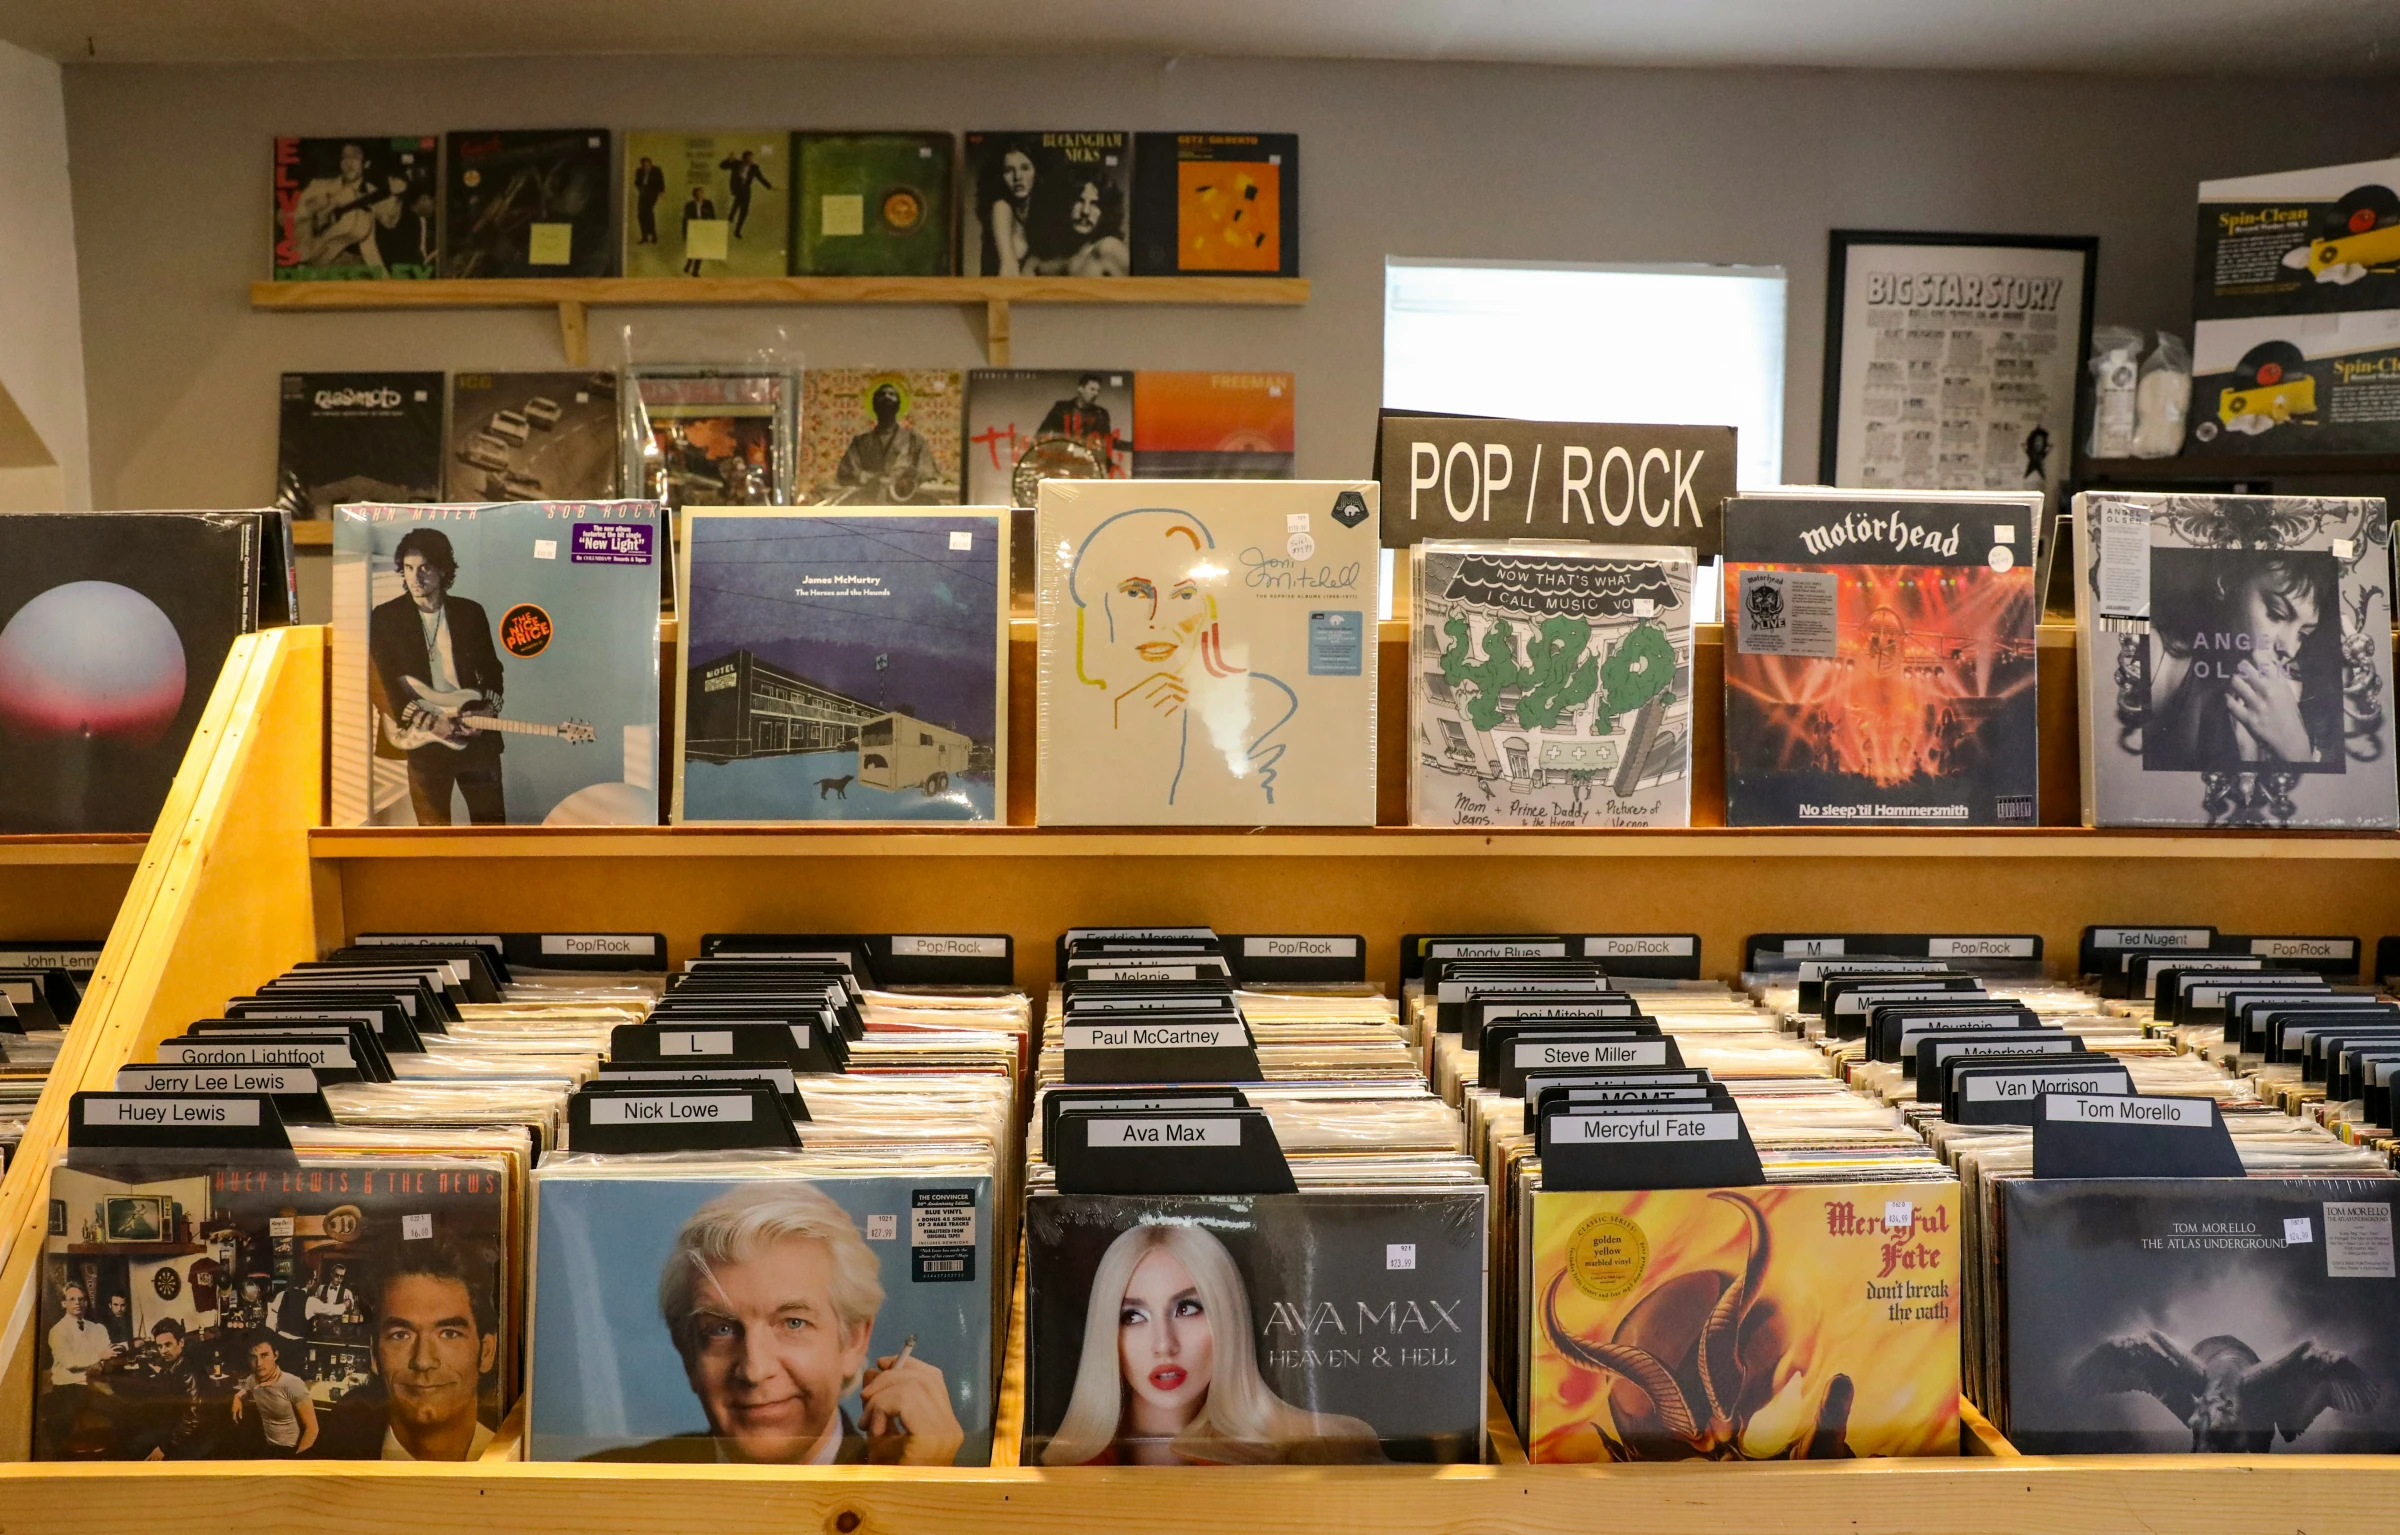 a display in a music store full of records